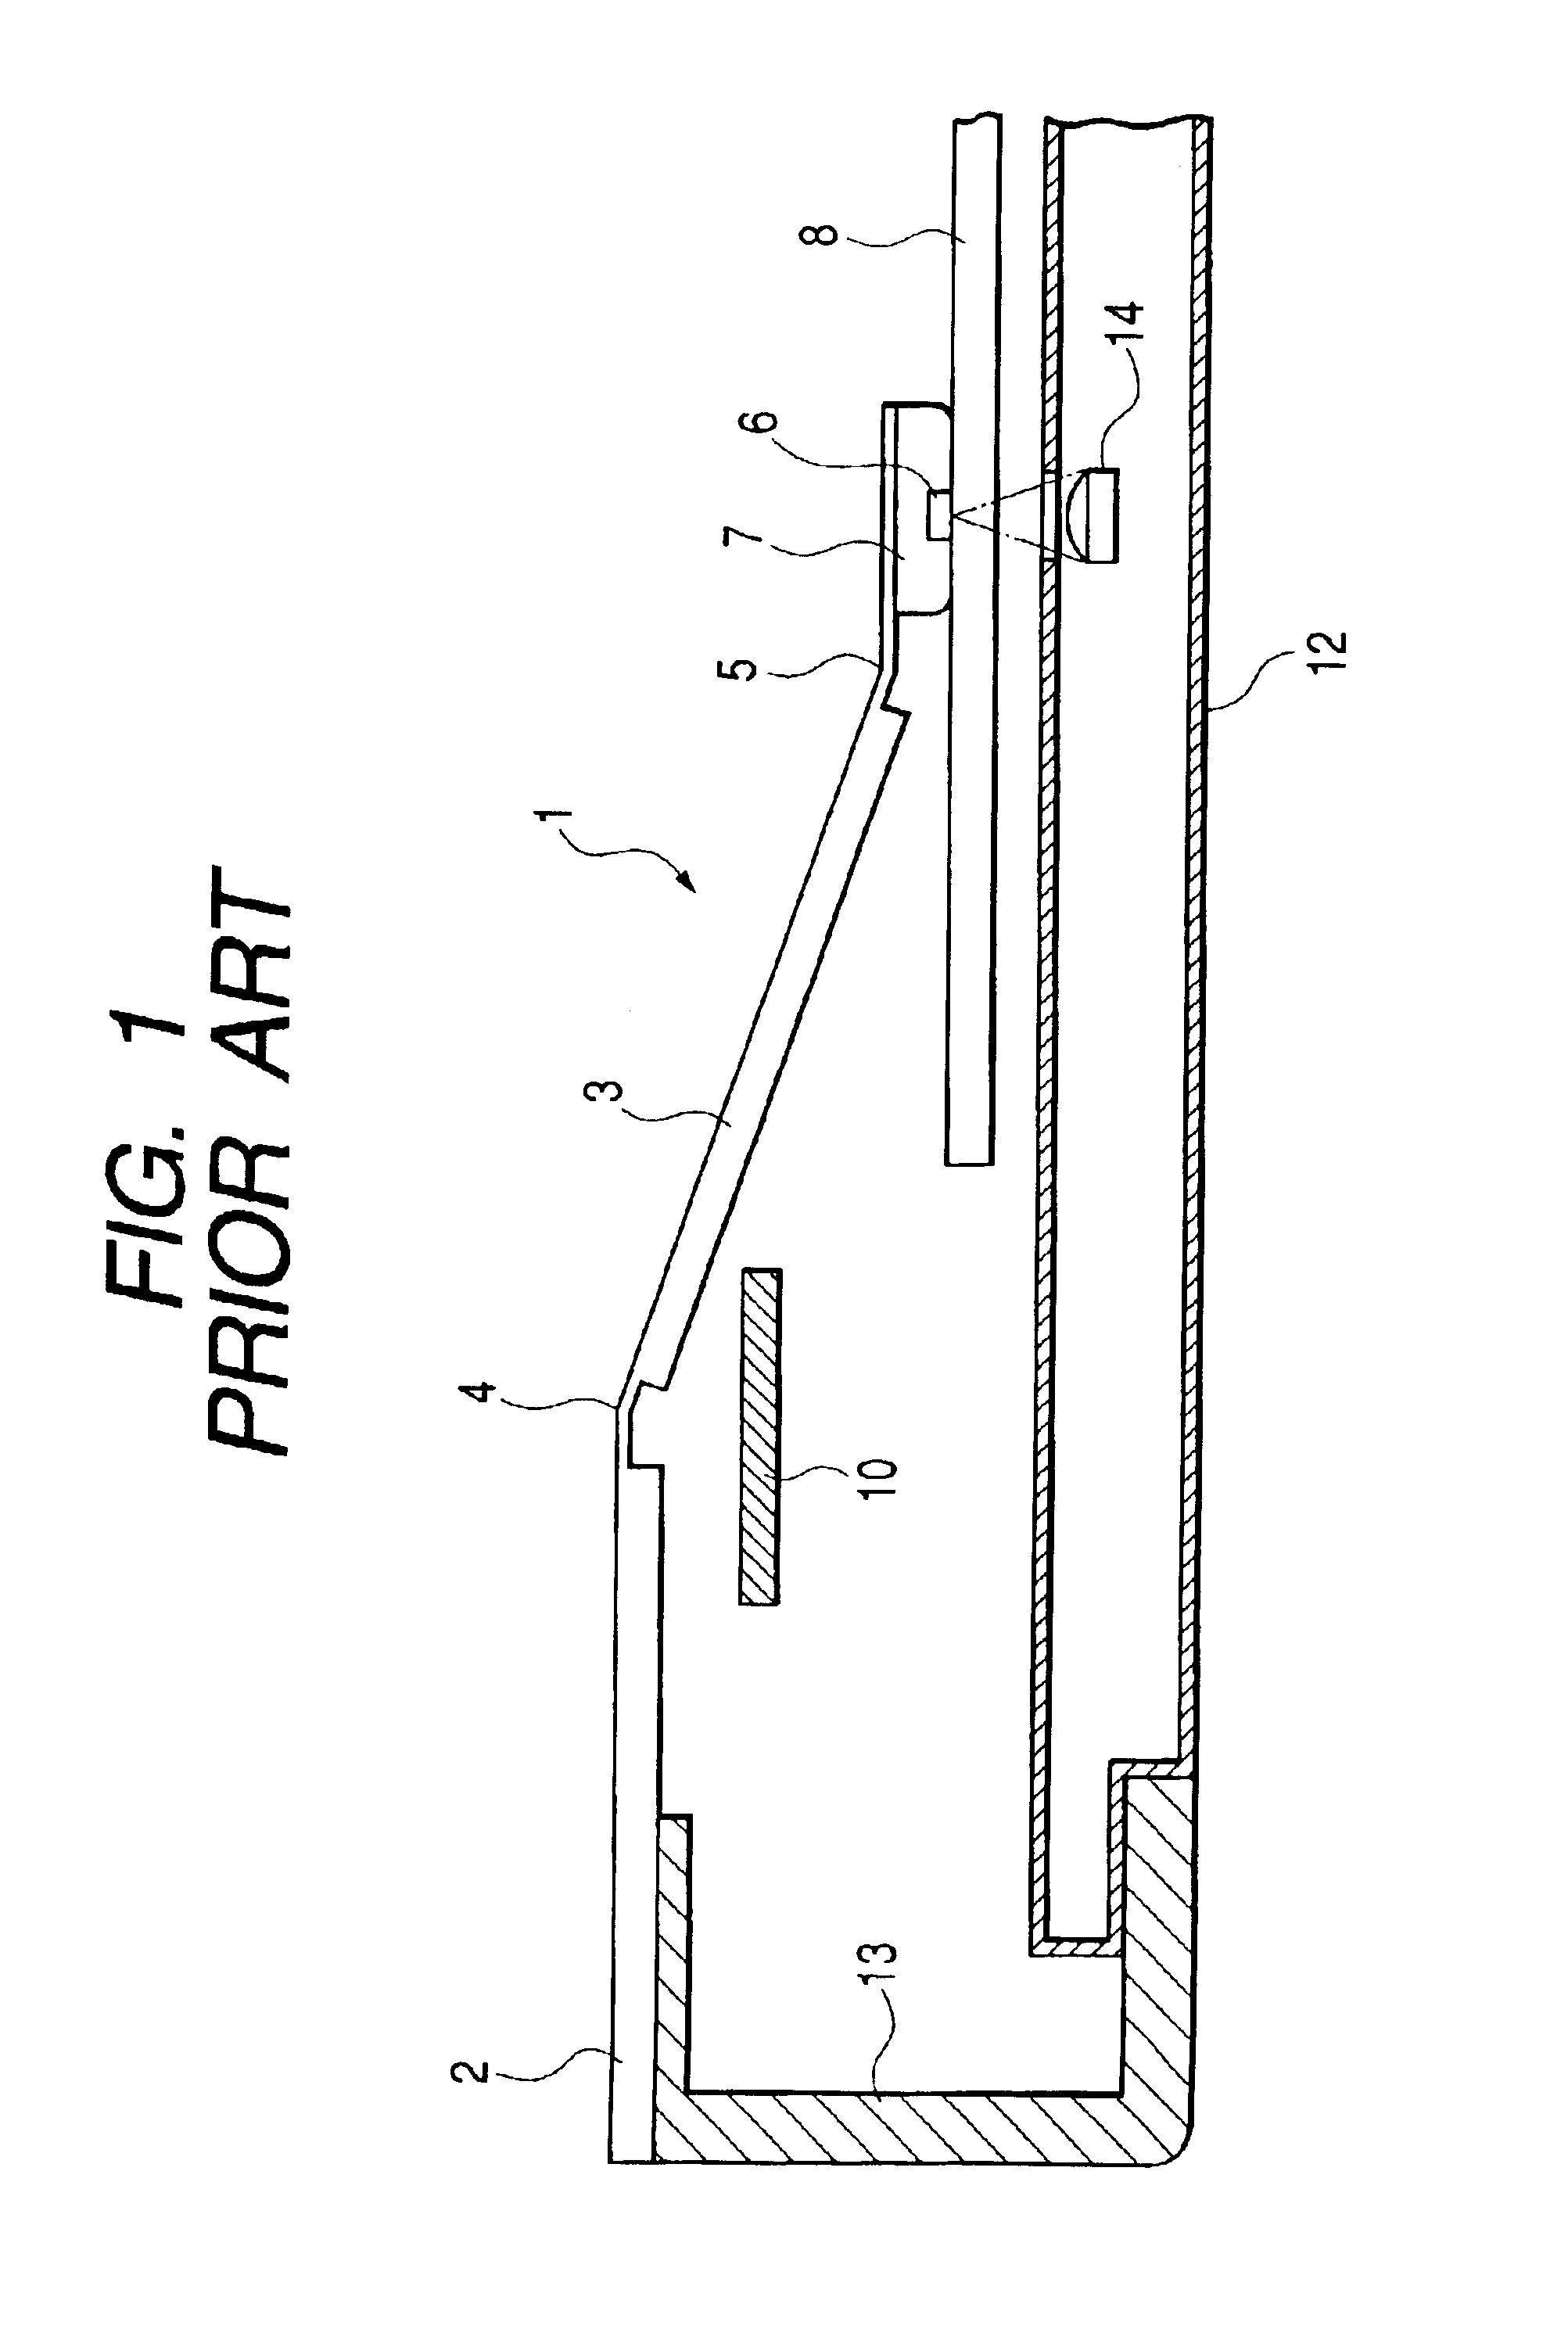 Magneto-optical recording apparatus having a magnetic head with a regulating member